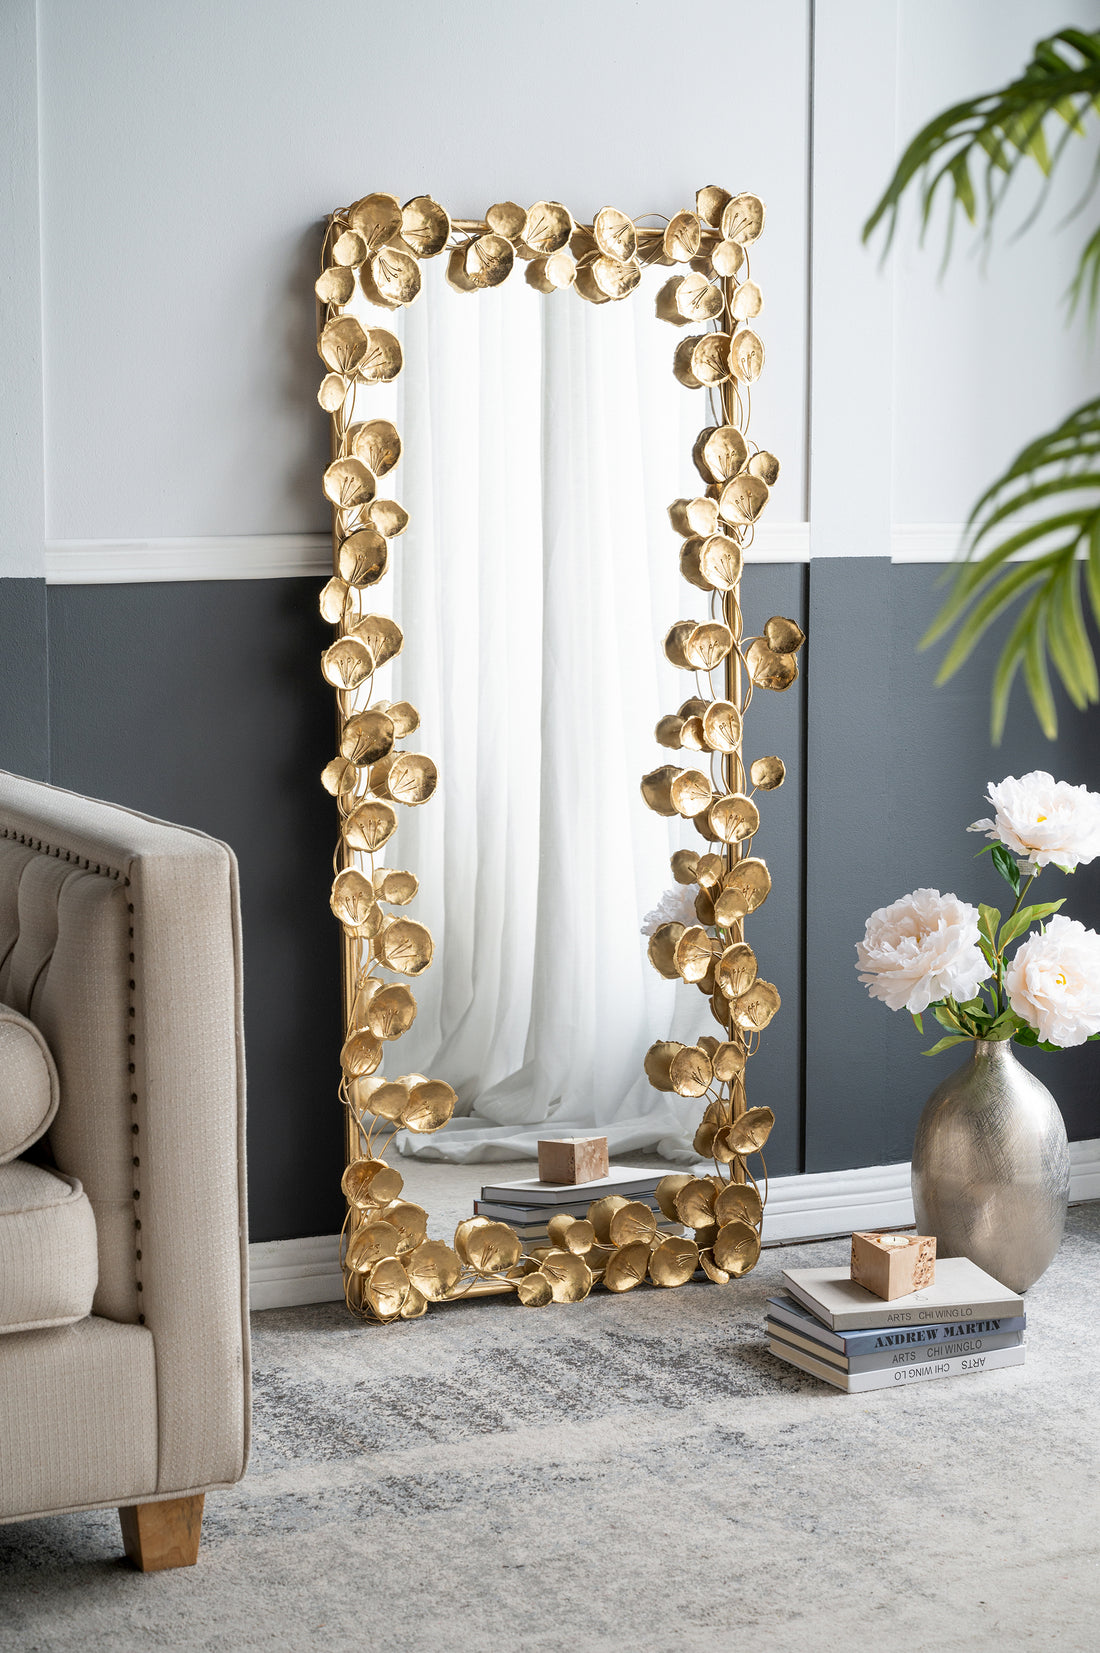 51.5" x 29" Full Length Arched Wall Mirror with Golden gold-iron